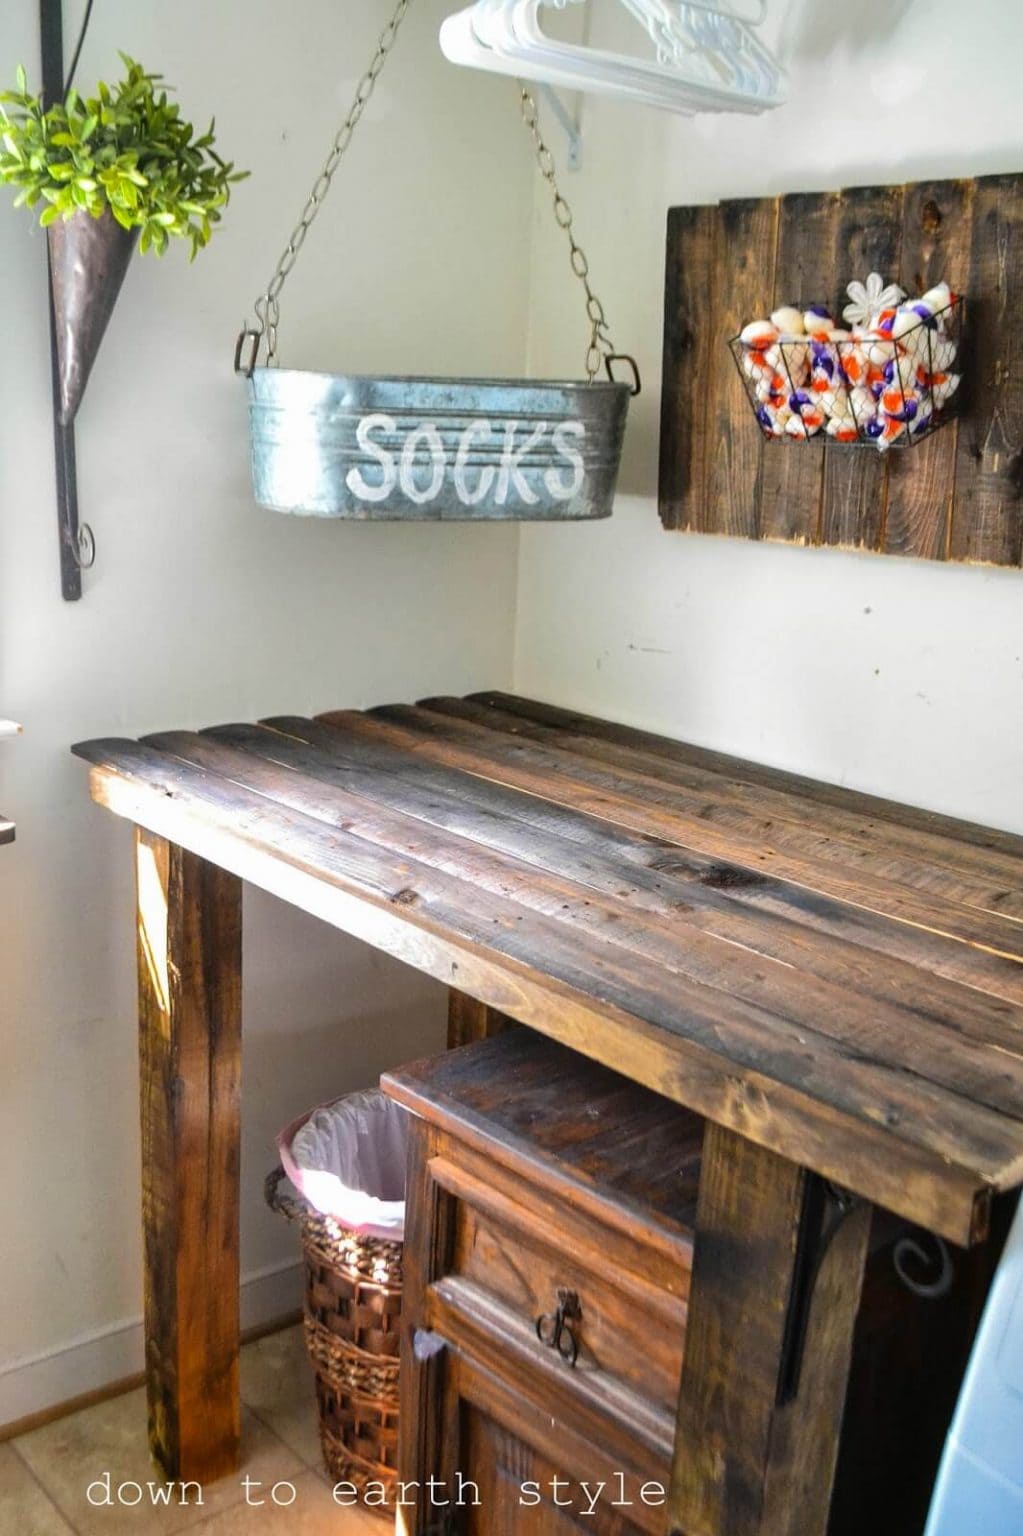 29 ideas to decorate your laundry room in vintage style - 75